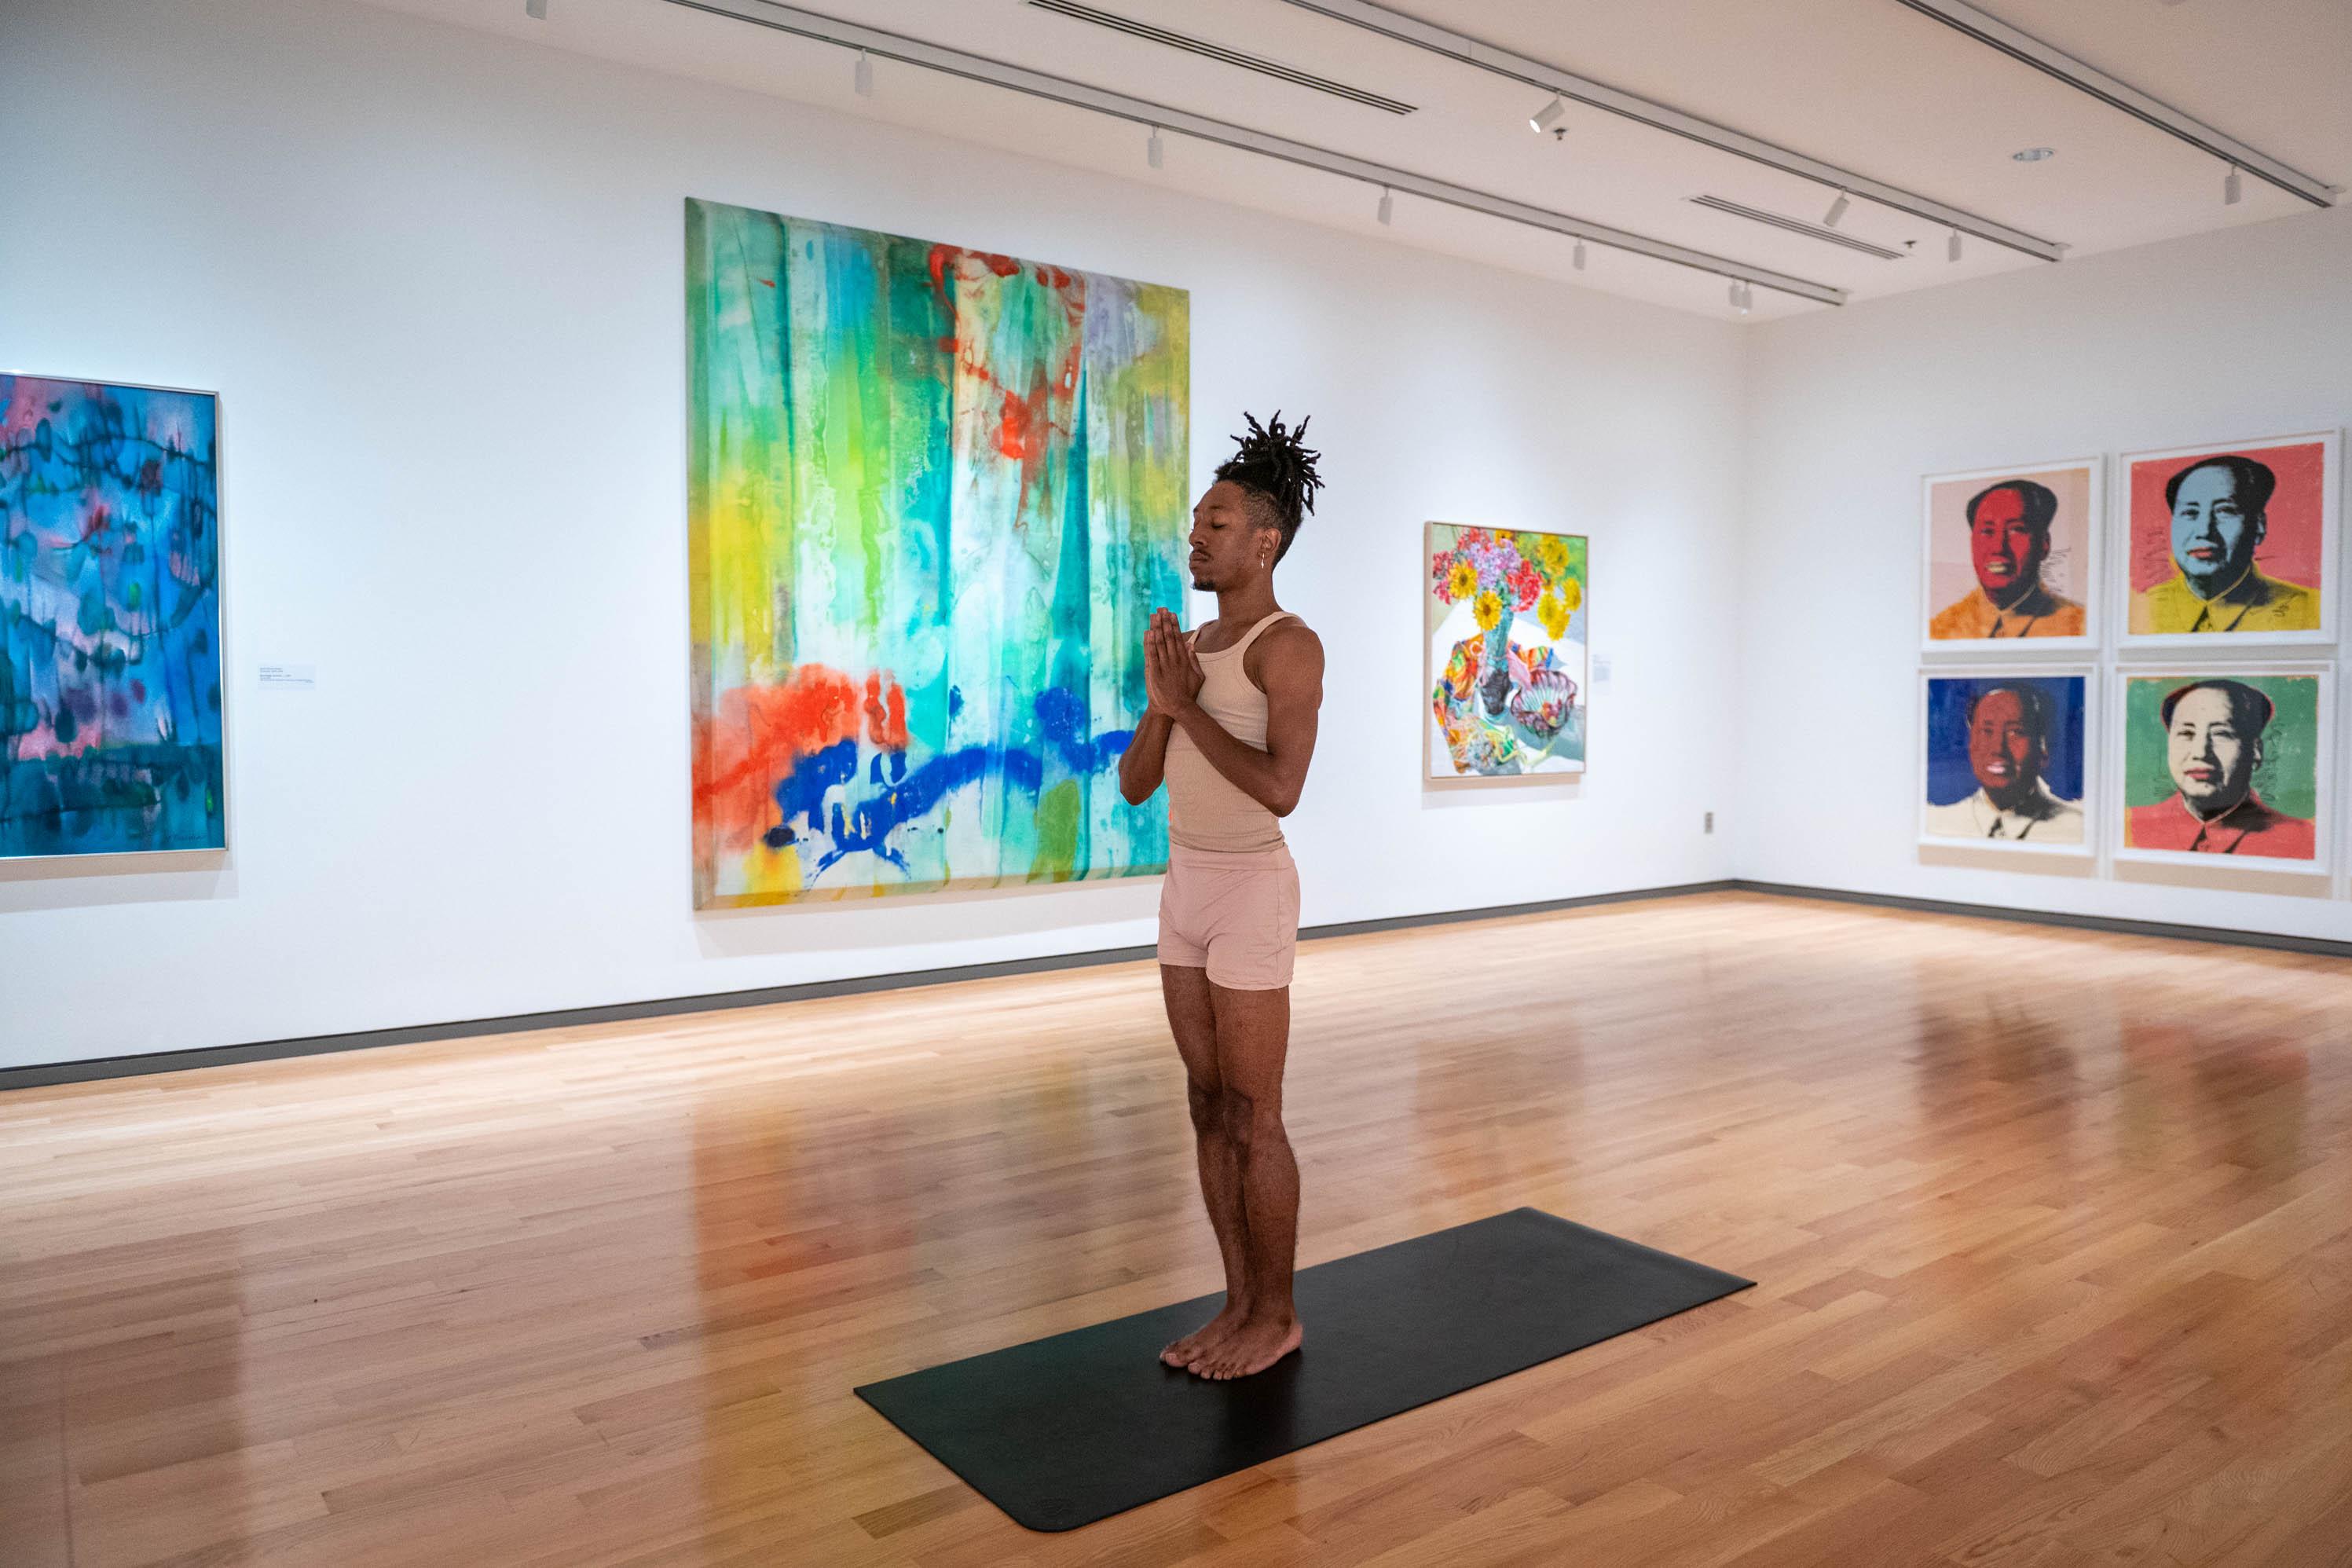 Dre Drummond in yoga pose in Gallery of colorful art 